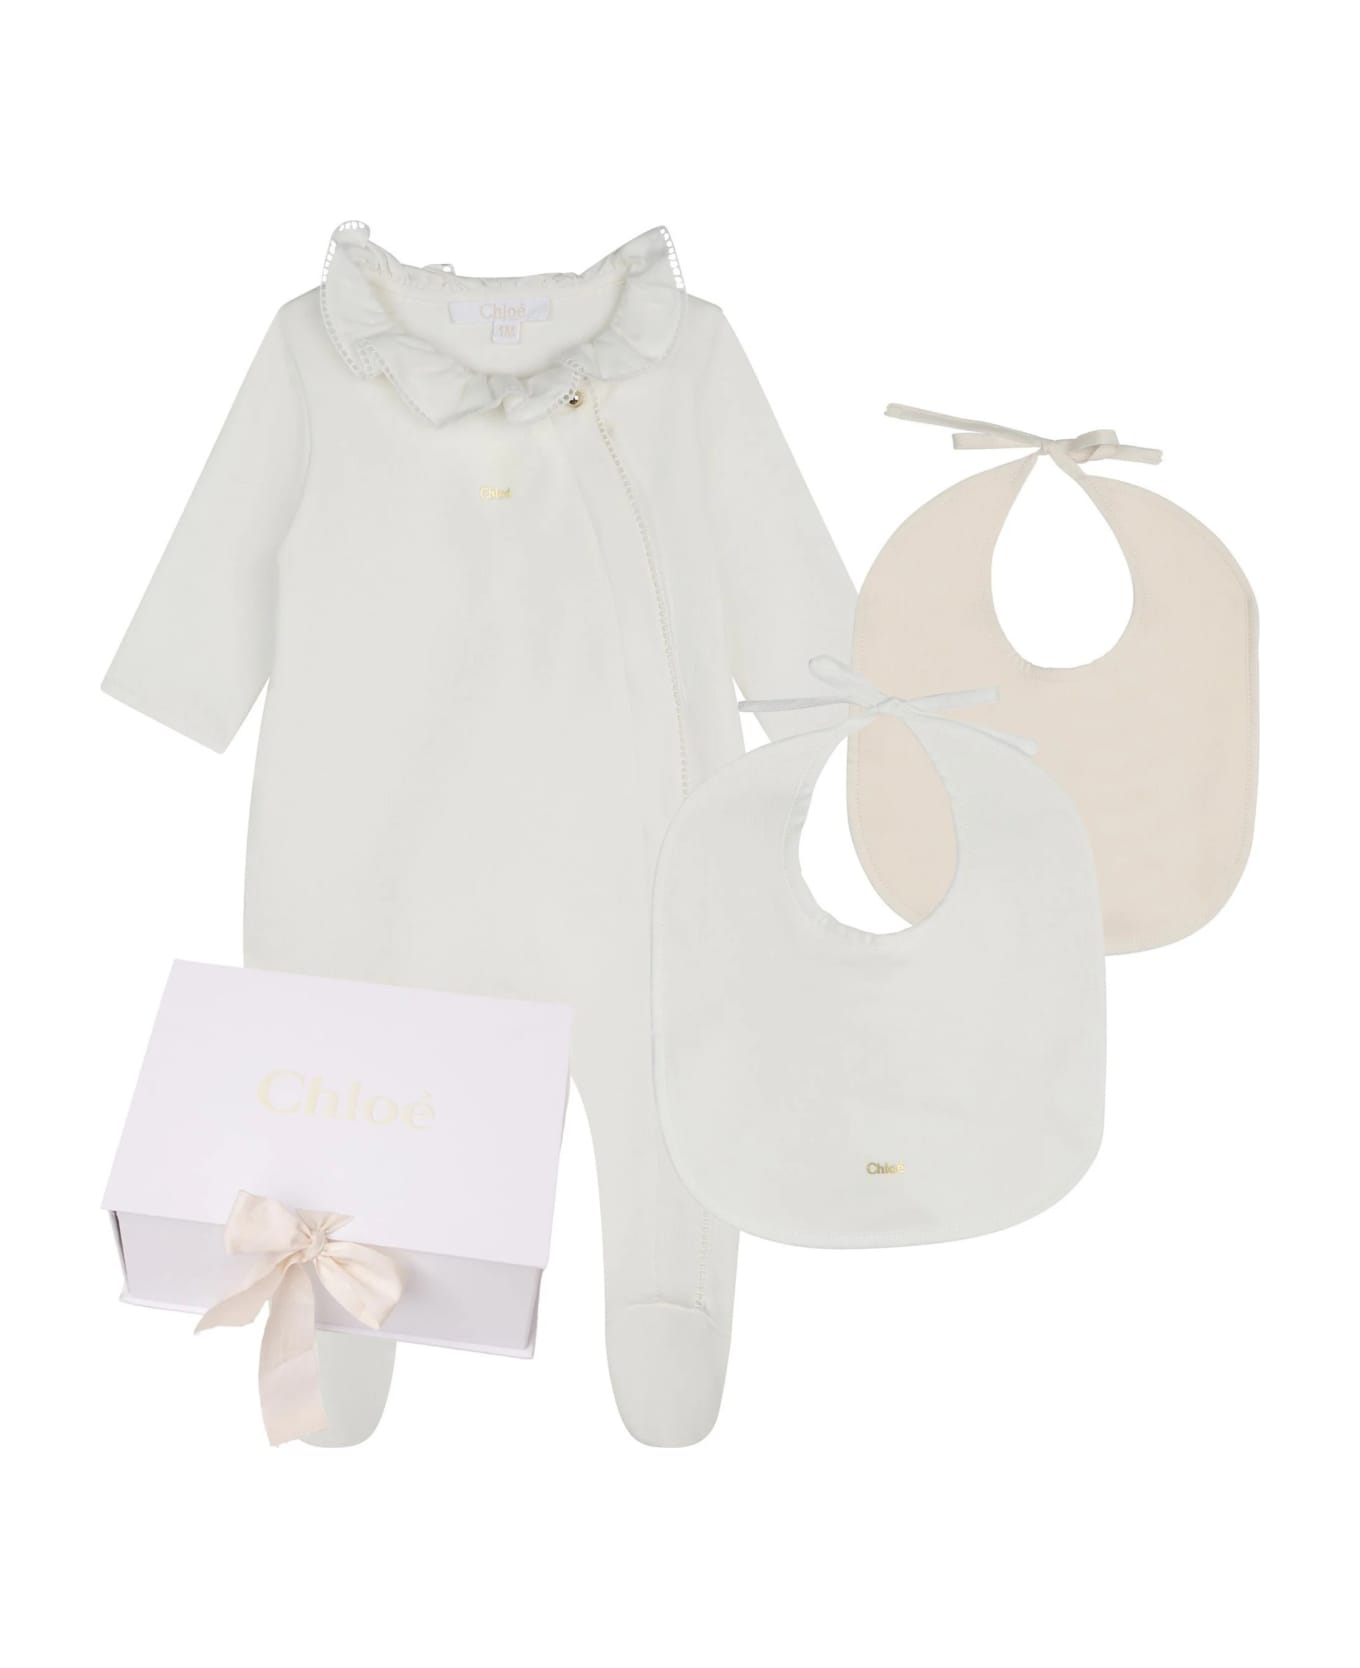 Chloé Gift Set With Playsuit And Bibs - White